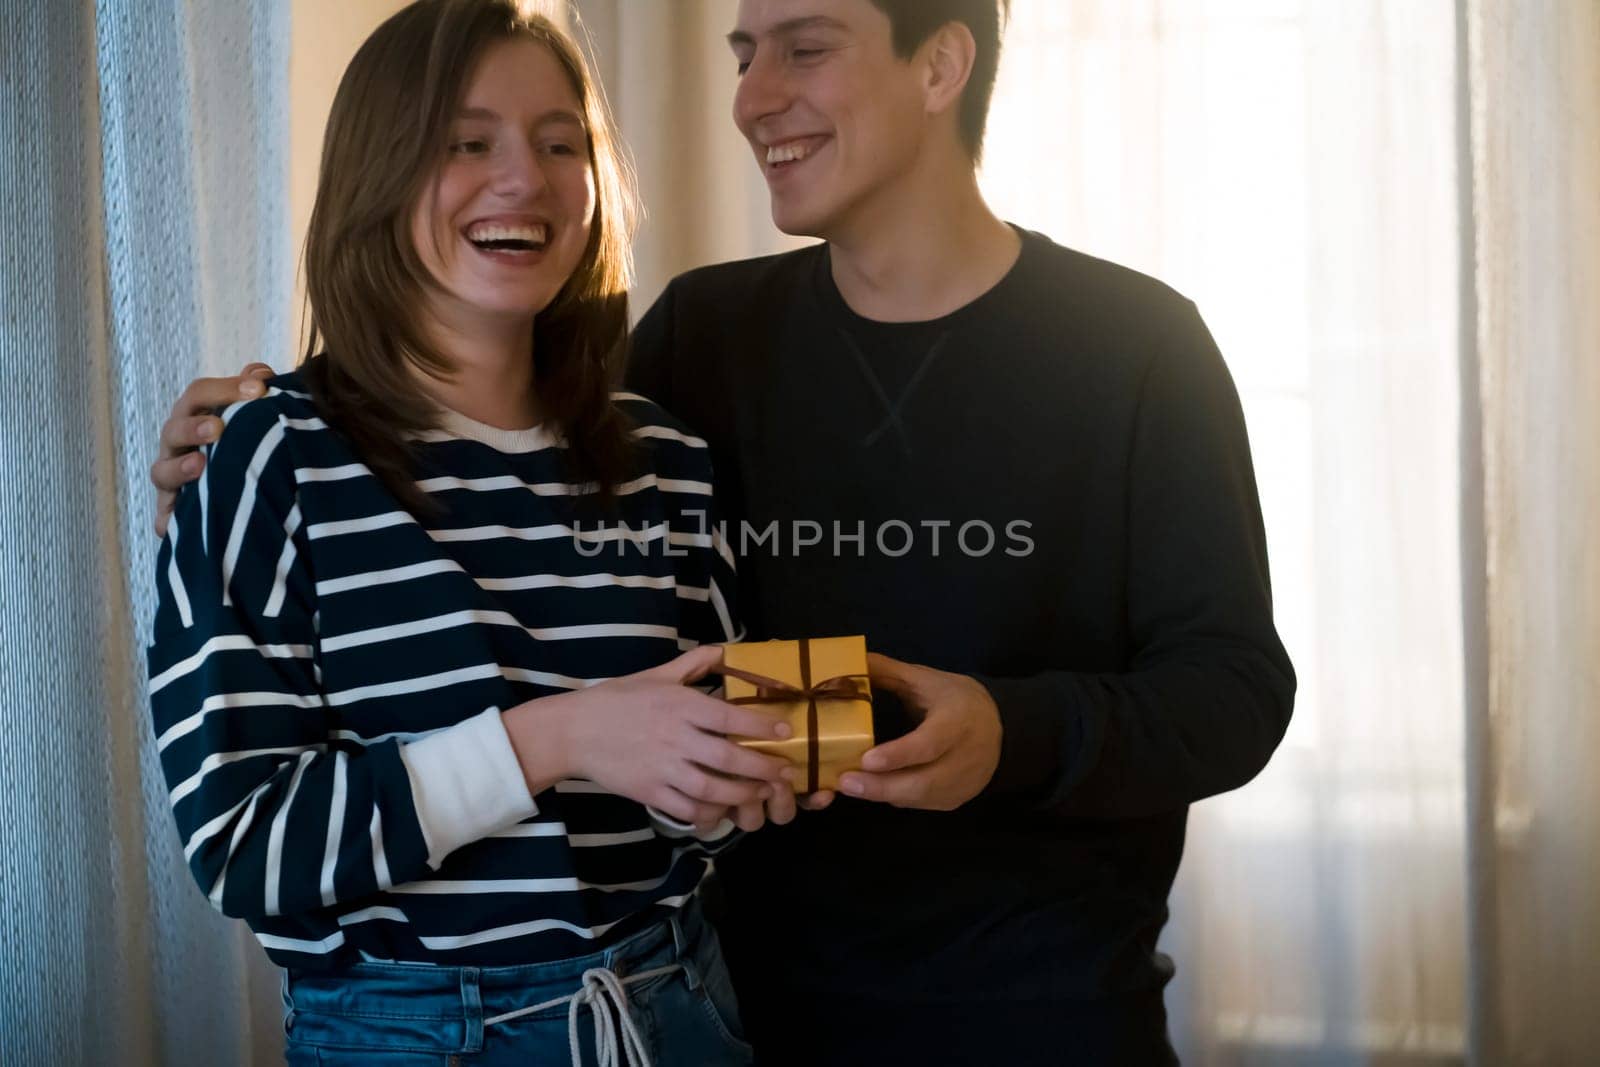 Young man and woman laugh and have a good time together in their cozy home, feel unity. Couple celebrating holidays, valentine's day, anniversary, new year or birthday and give each other cute gifts.